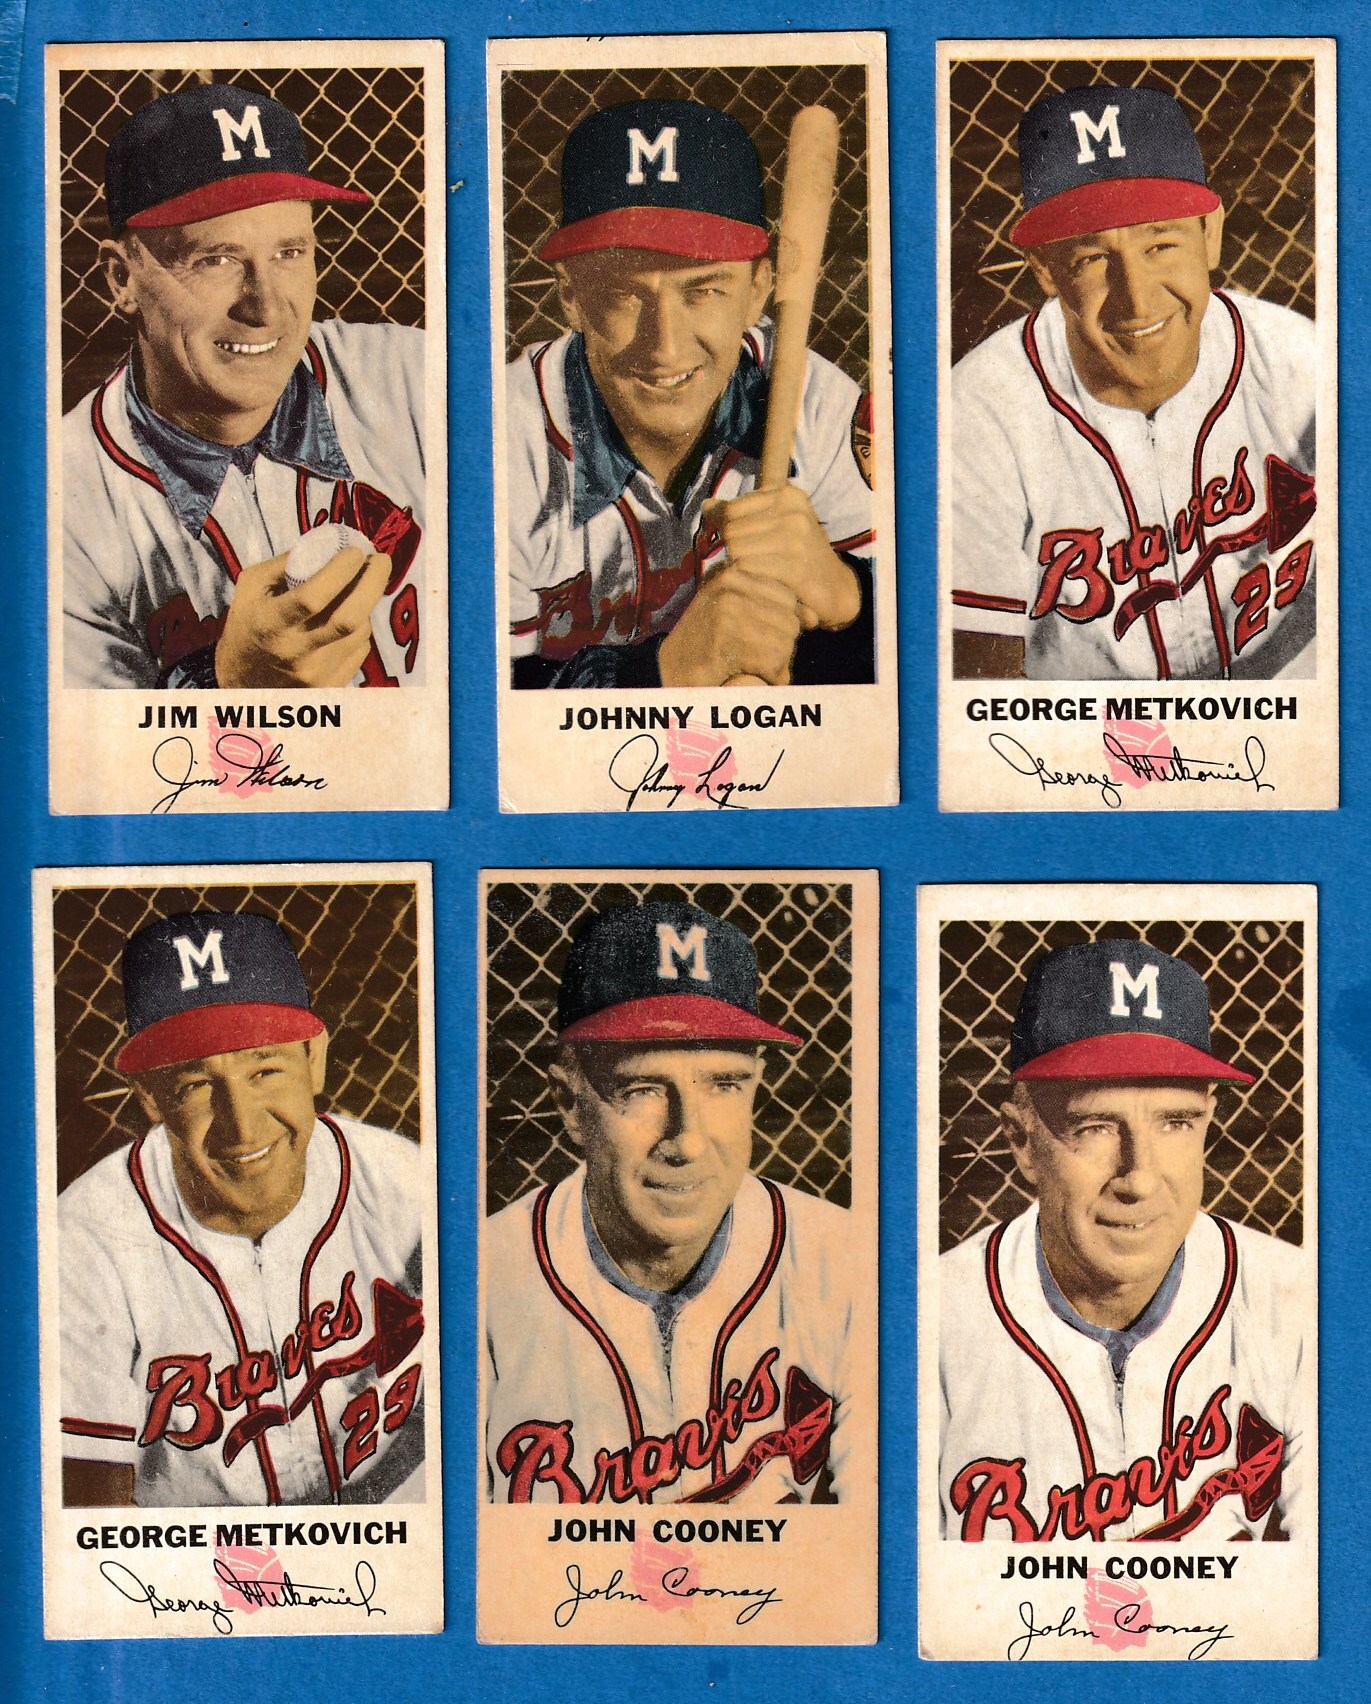 1954 Johnston Cookies #28 Johnny Cooney COACH (Braves) Baseball cards value